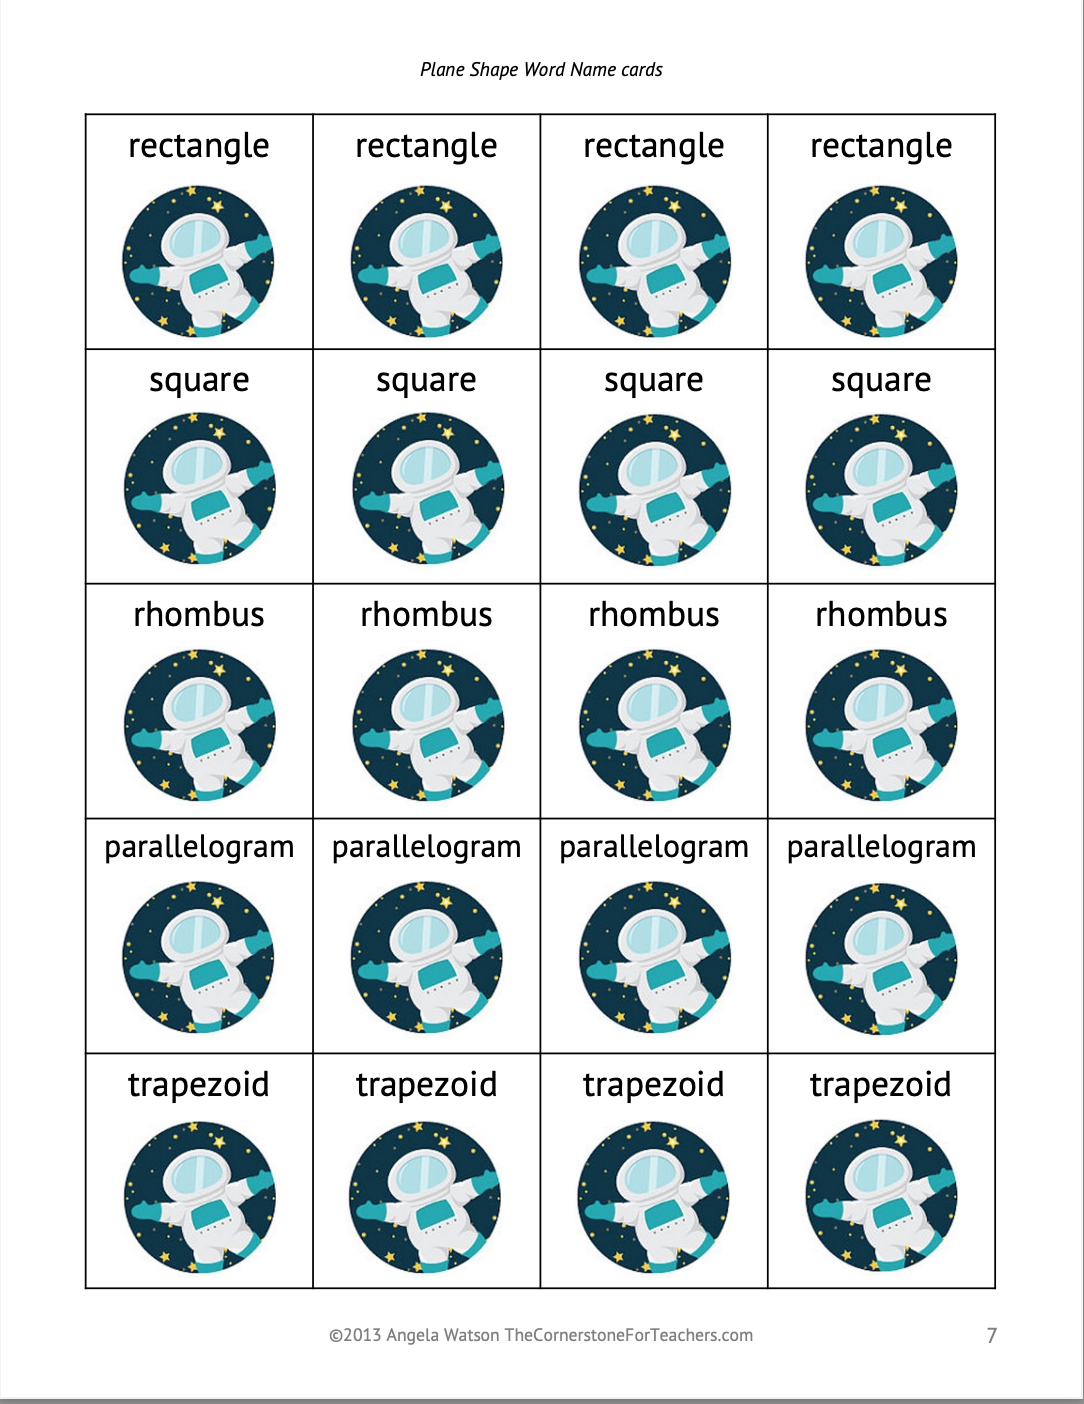 FREE 2D Shape Cards for sorting, matching, and other geometry activities